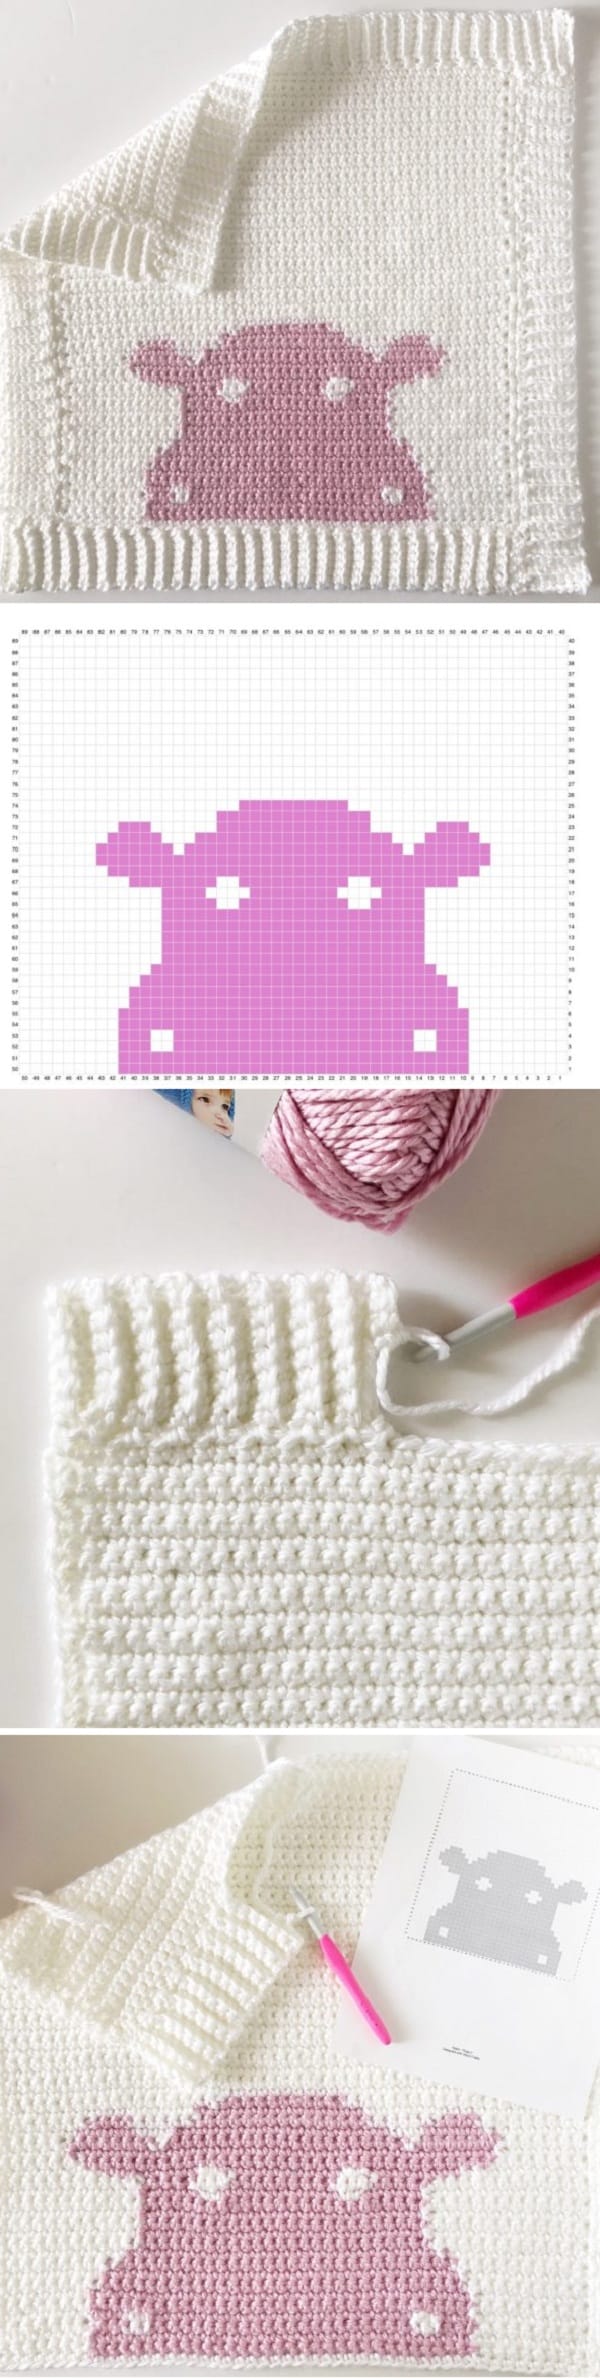 This is a video that accompanies the Hippo Crochet Blanket. I had this thought that these little blankets would be so fun to make to accompany a children's book.